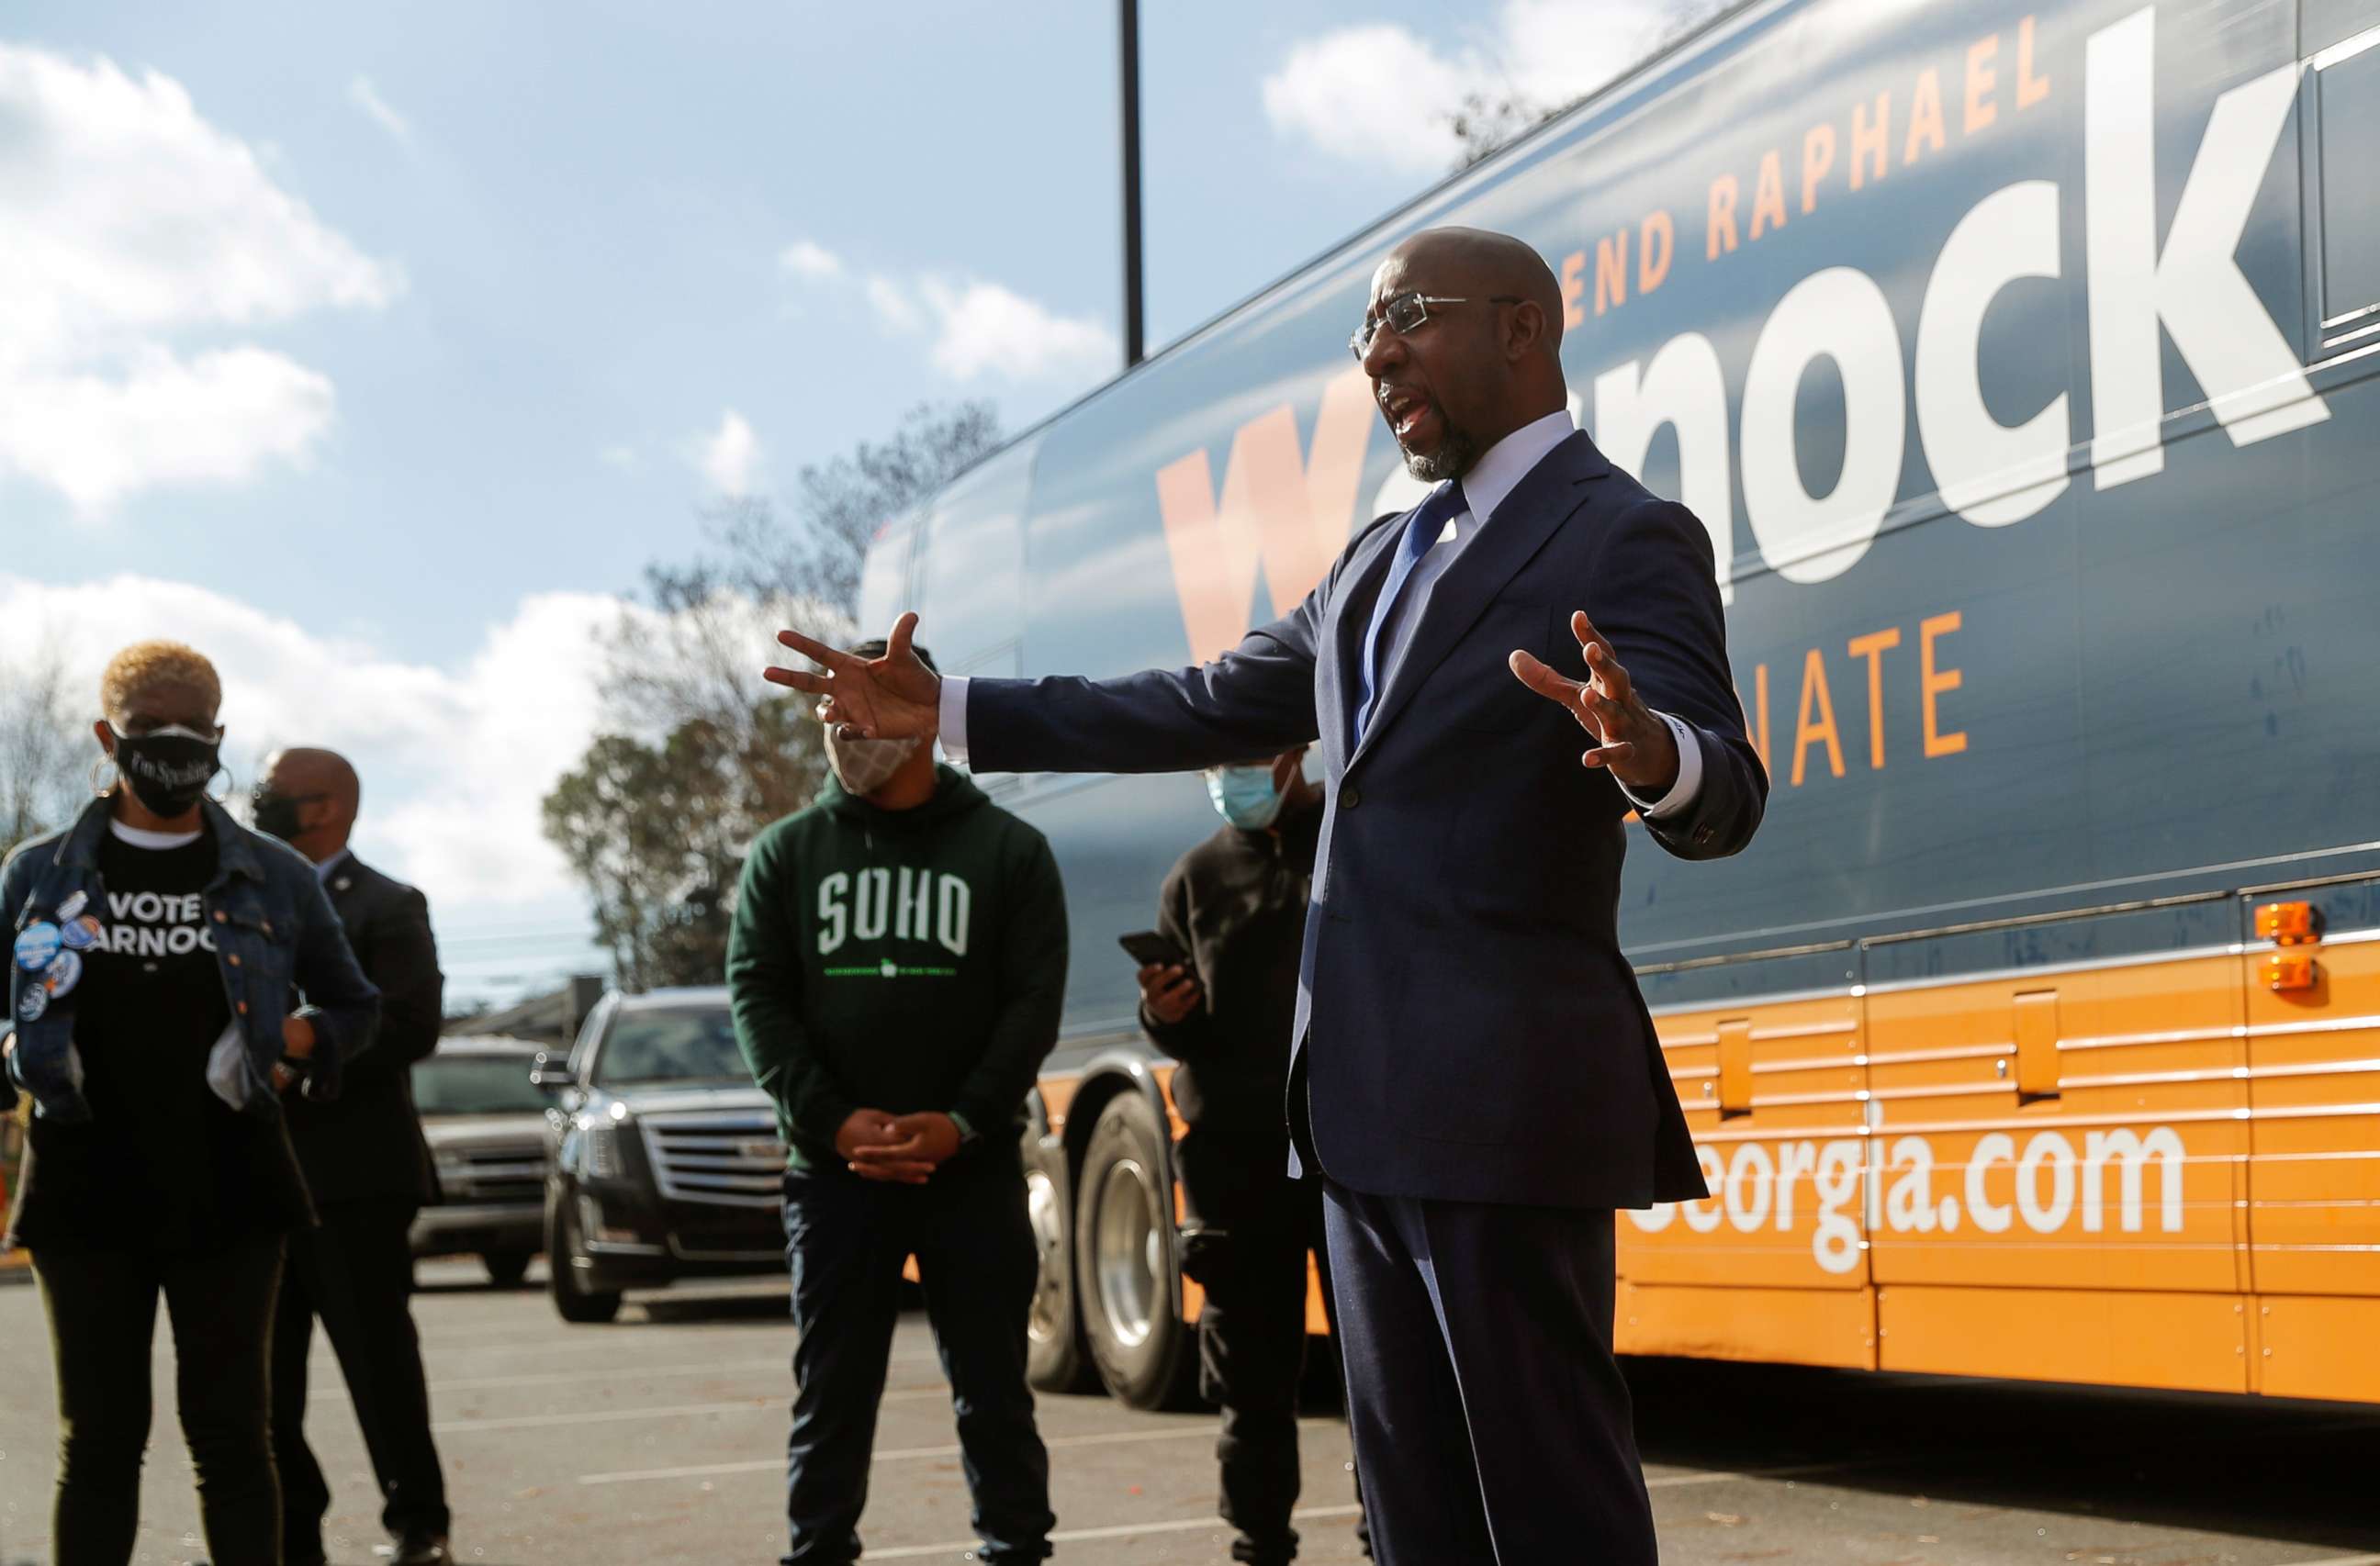 PHOTO: Democratic Senate candidate Raphael Warnock appears at a small rally with young campaign volunteers on election day in Georgia's U.S. Senate runoff election, in Marietta, Ga., Jan. 5, 2021.